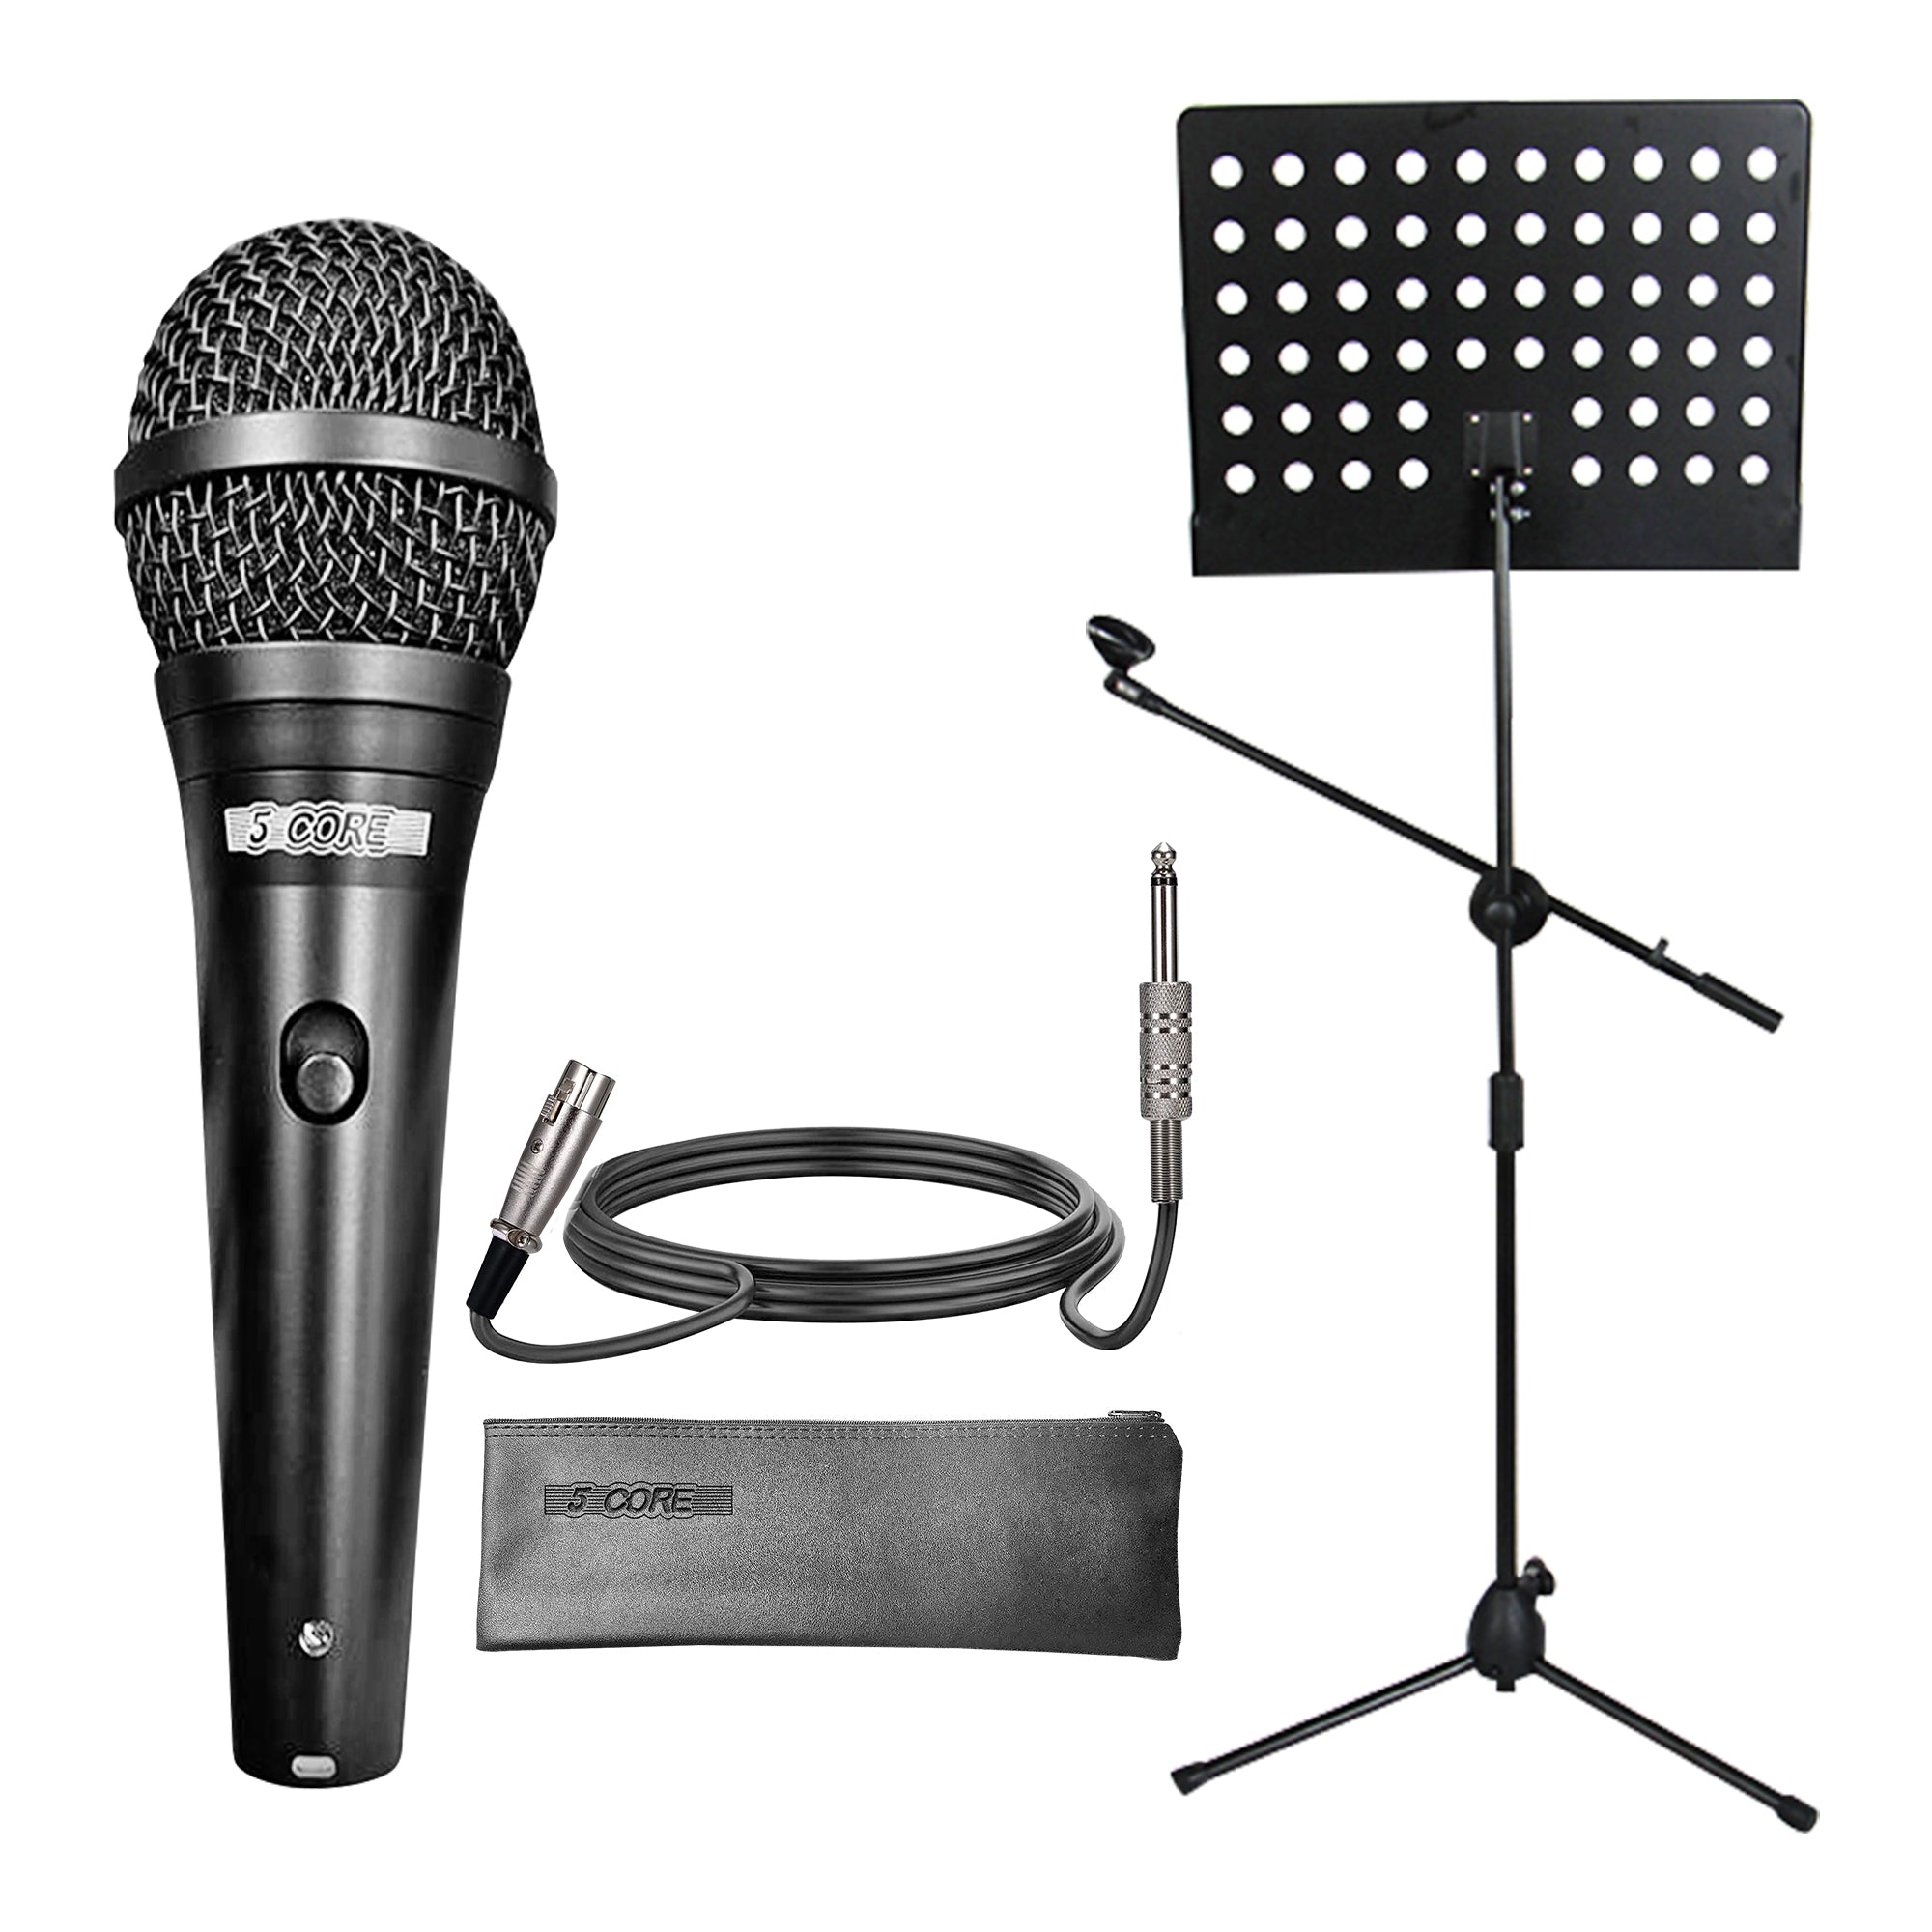 Handheld Dynamic Microphone and Tripod Metal Stand- 5 Core